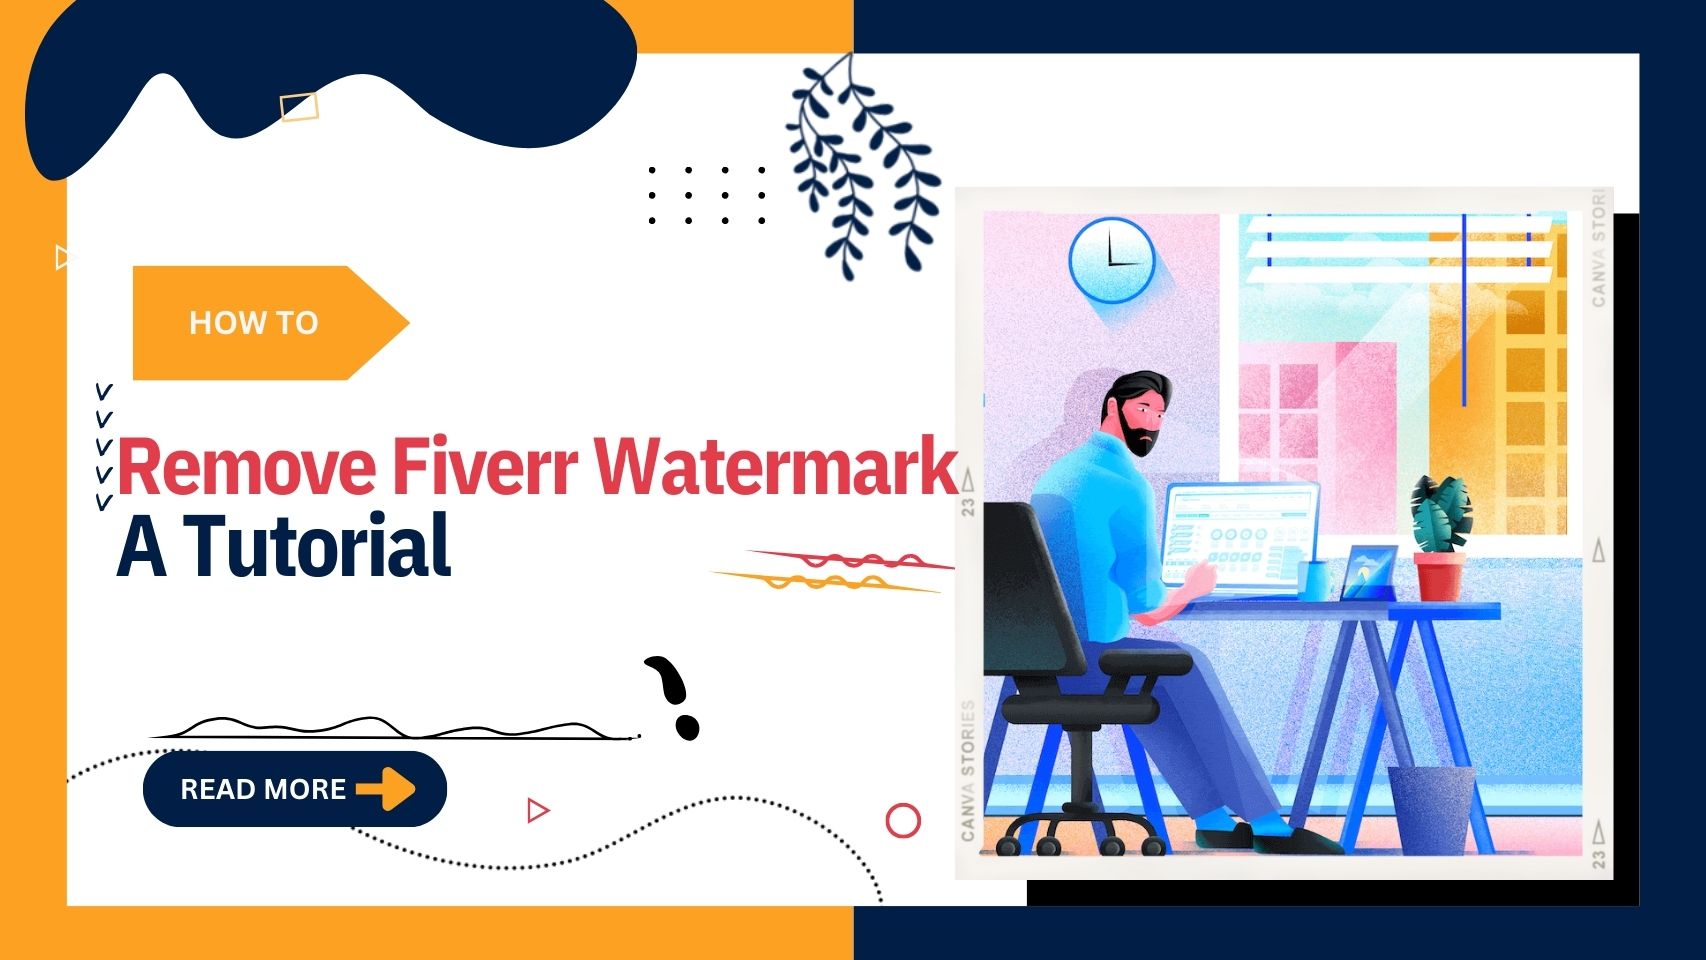 How to Remove Fiverr Watermark: A Tutorial